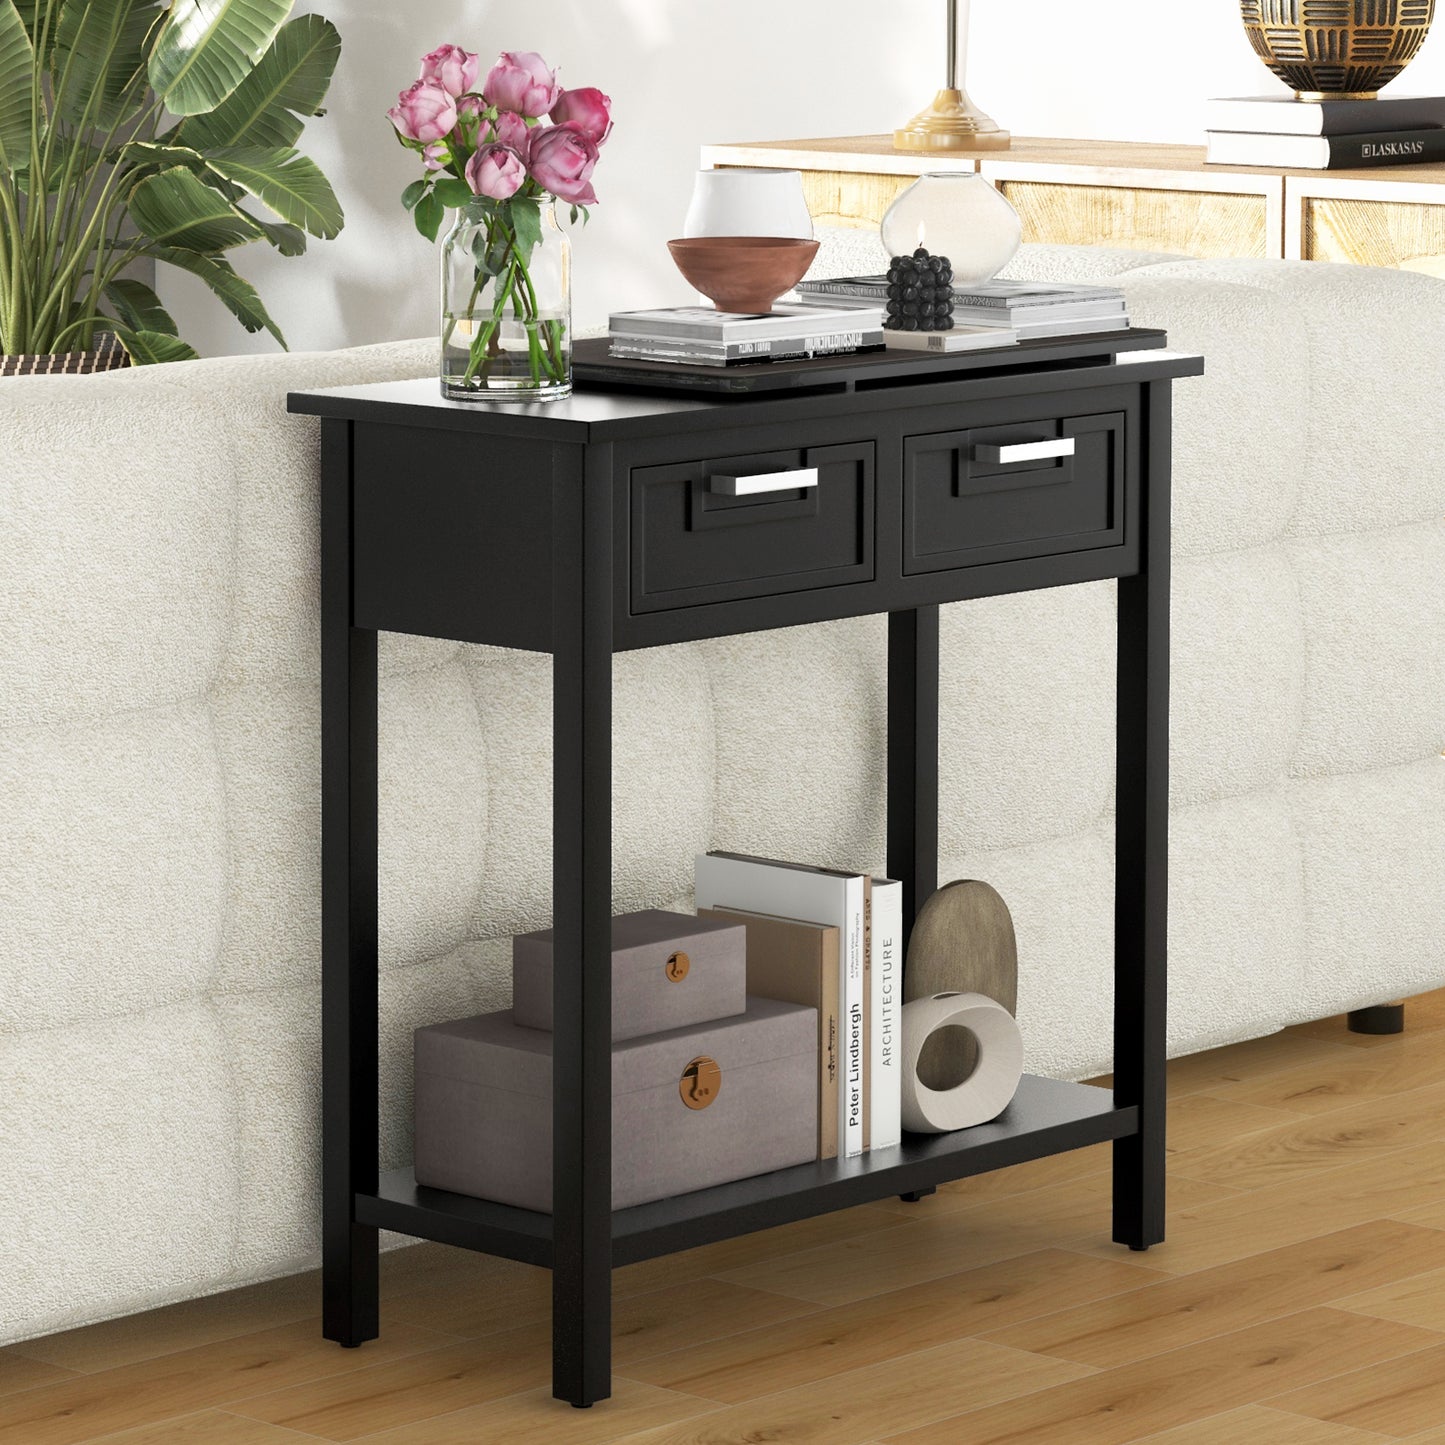 Narrow Console Table with Drawers and Open Storage Shelf-Black